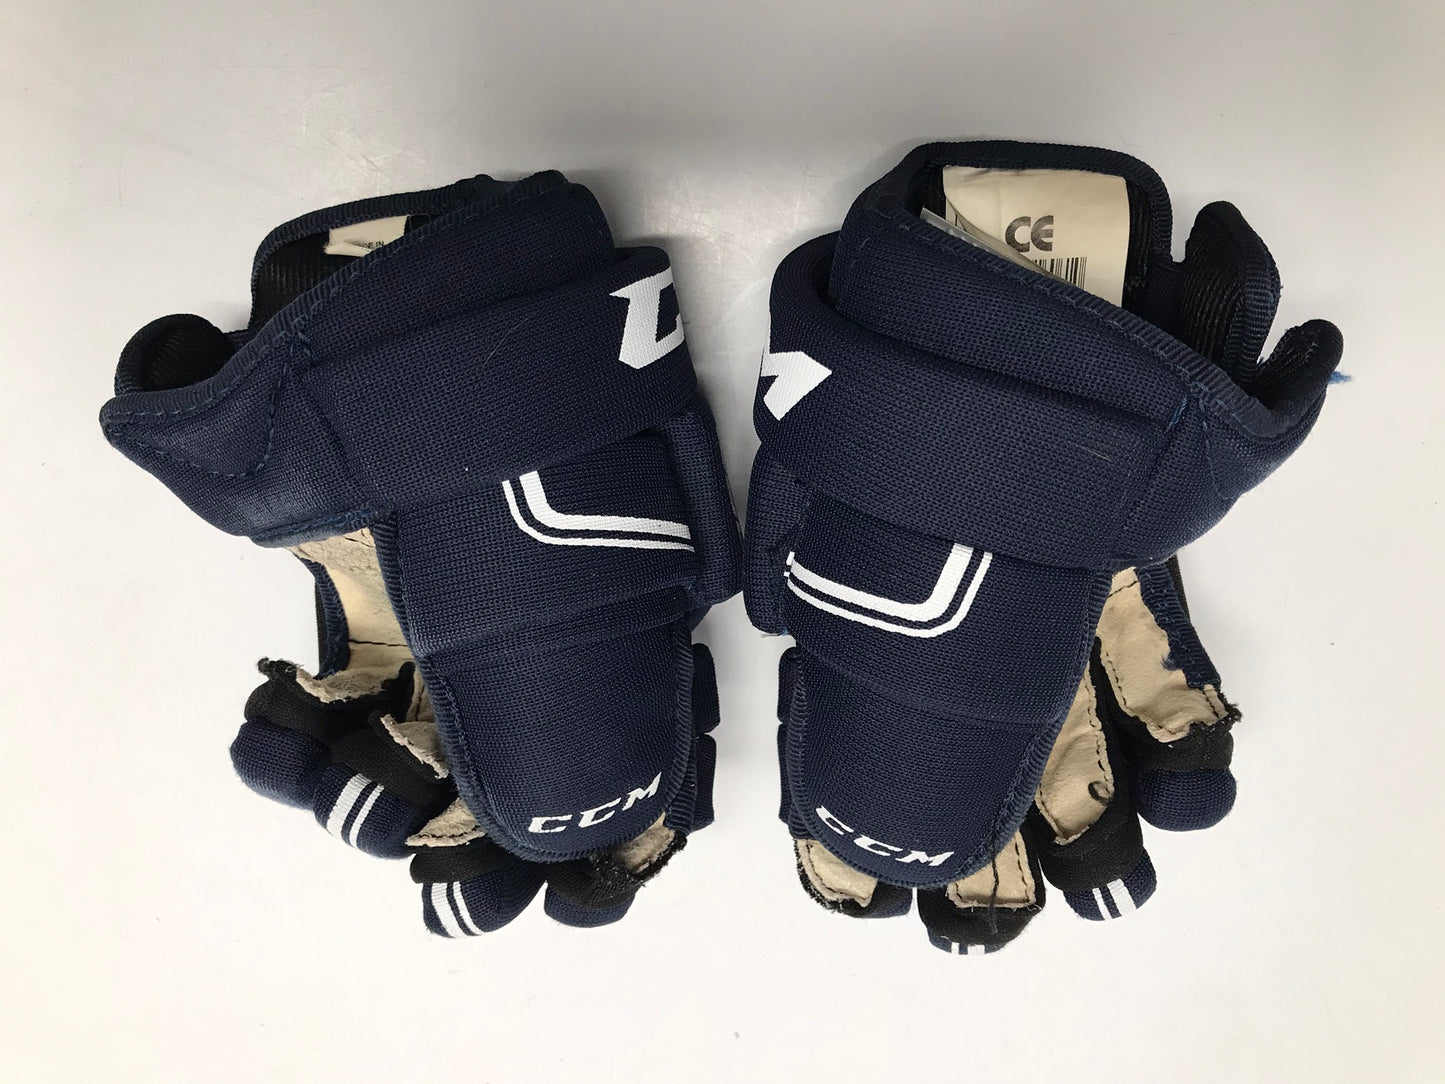 Hockey Gloves Child Size 9 inch Age 4-6 CCM Marine Blue and White Excellent